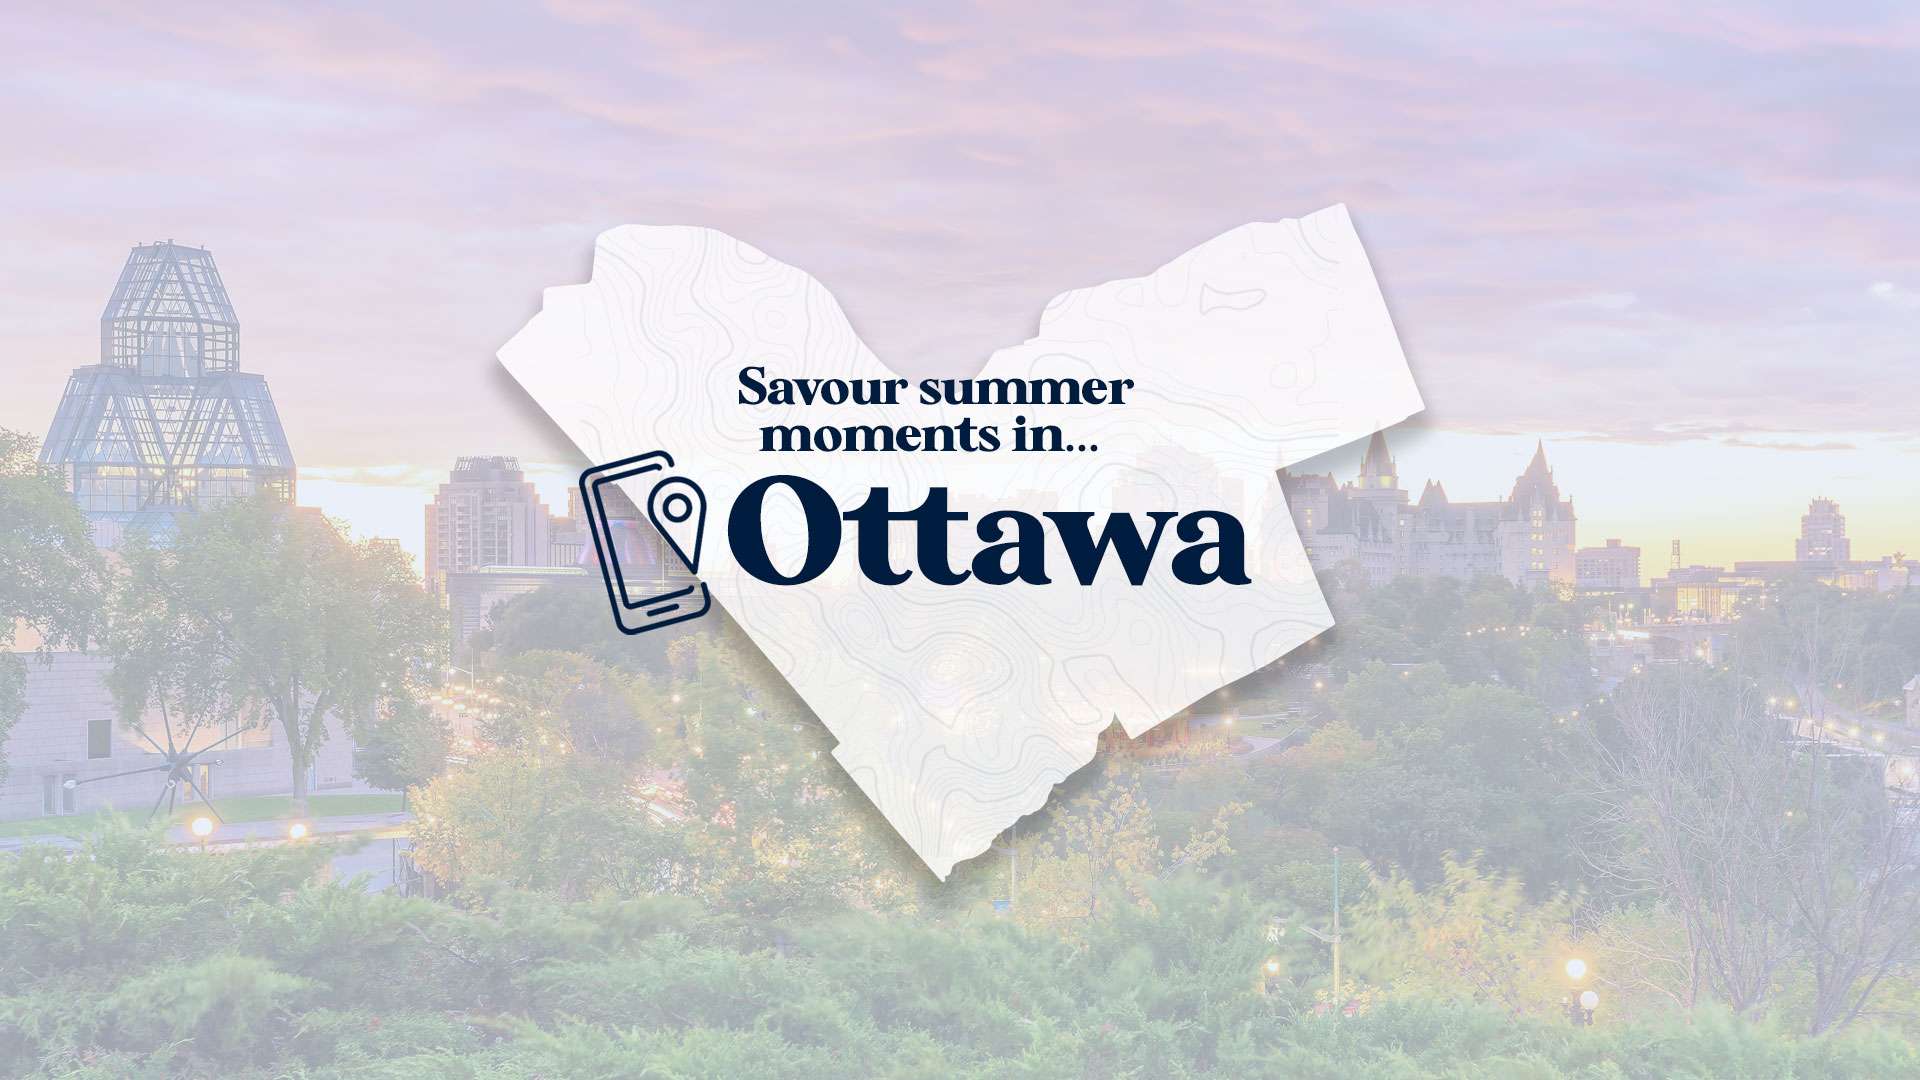 Savour Summer Moments Top 5 Ottawa logo over top of an image of the Ottawa skyline at sunset. 